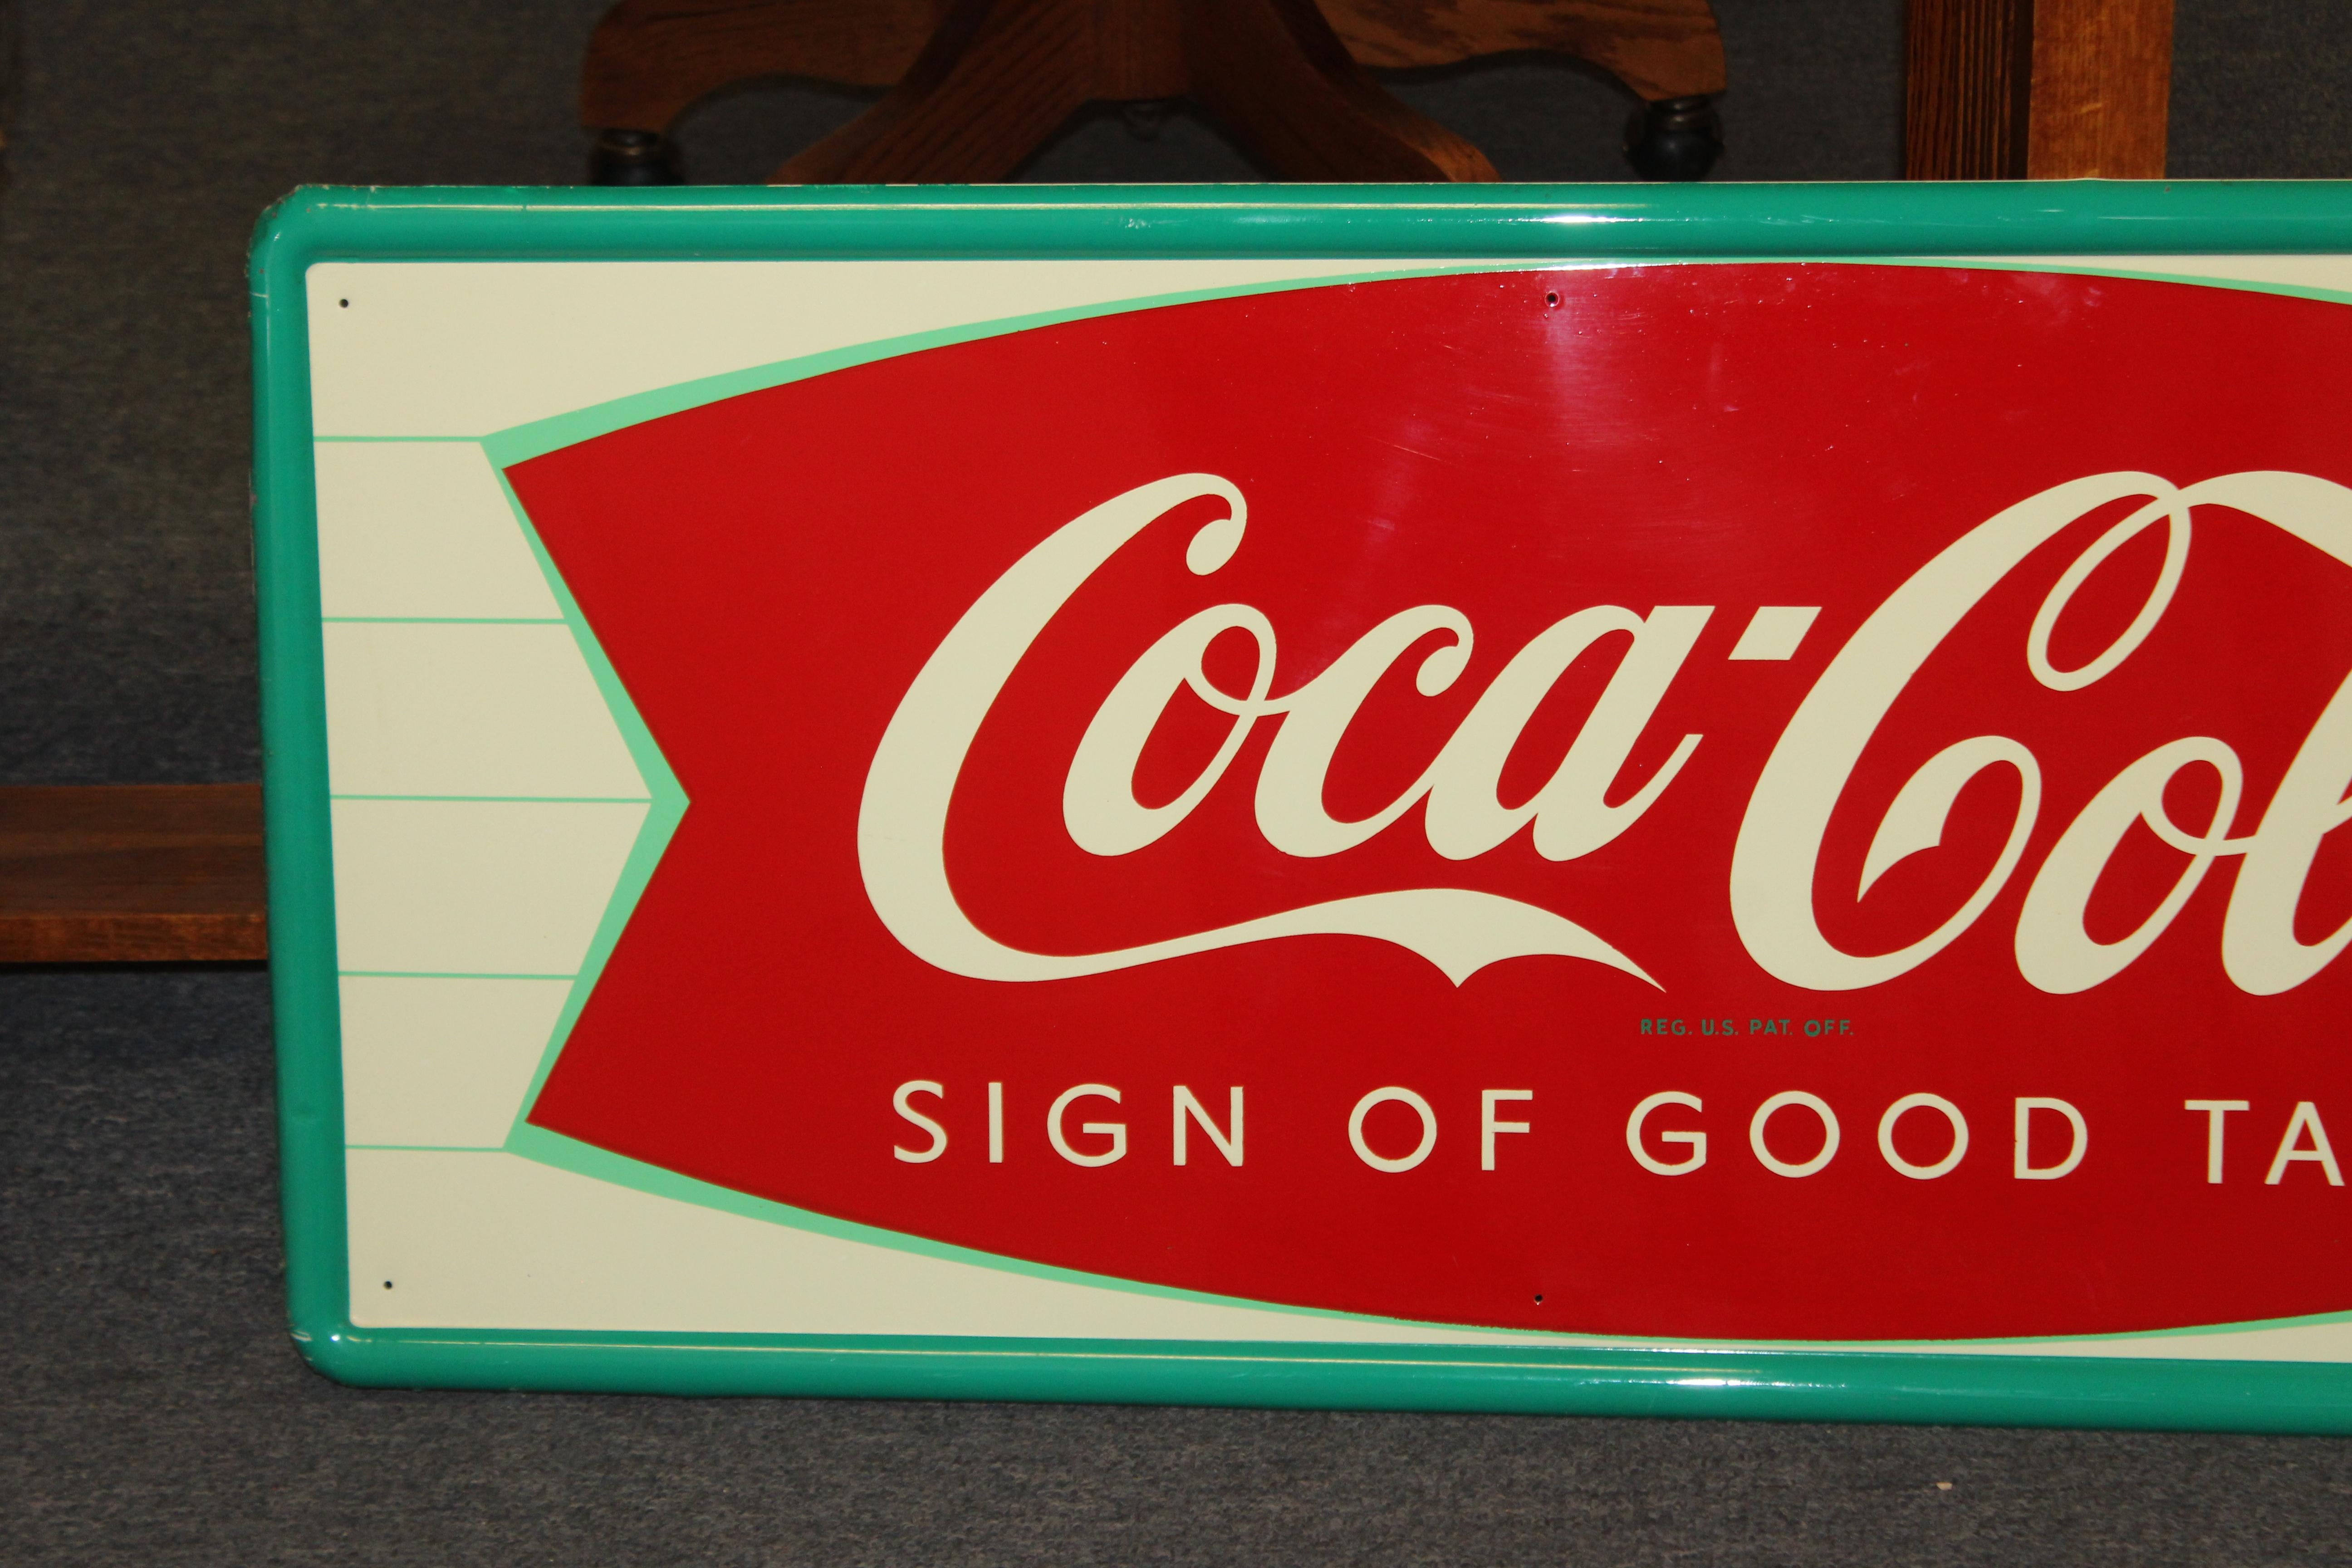 This sign seems to be New Old Stock and is advertising the Classic fishtail logo along with The Coca-Cola bottle. This sign is manufactured by the Robertson Sign Company. This Coca-Cola piece will make a great contribution to anyone's soda